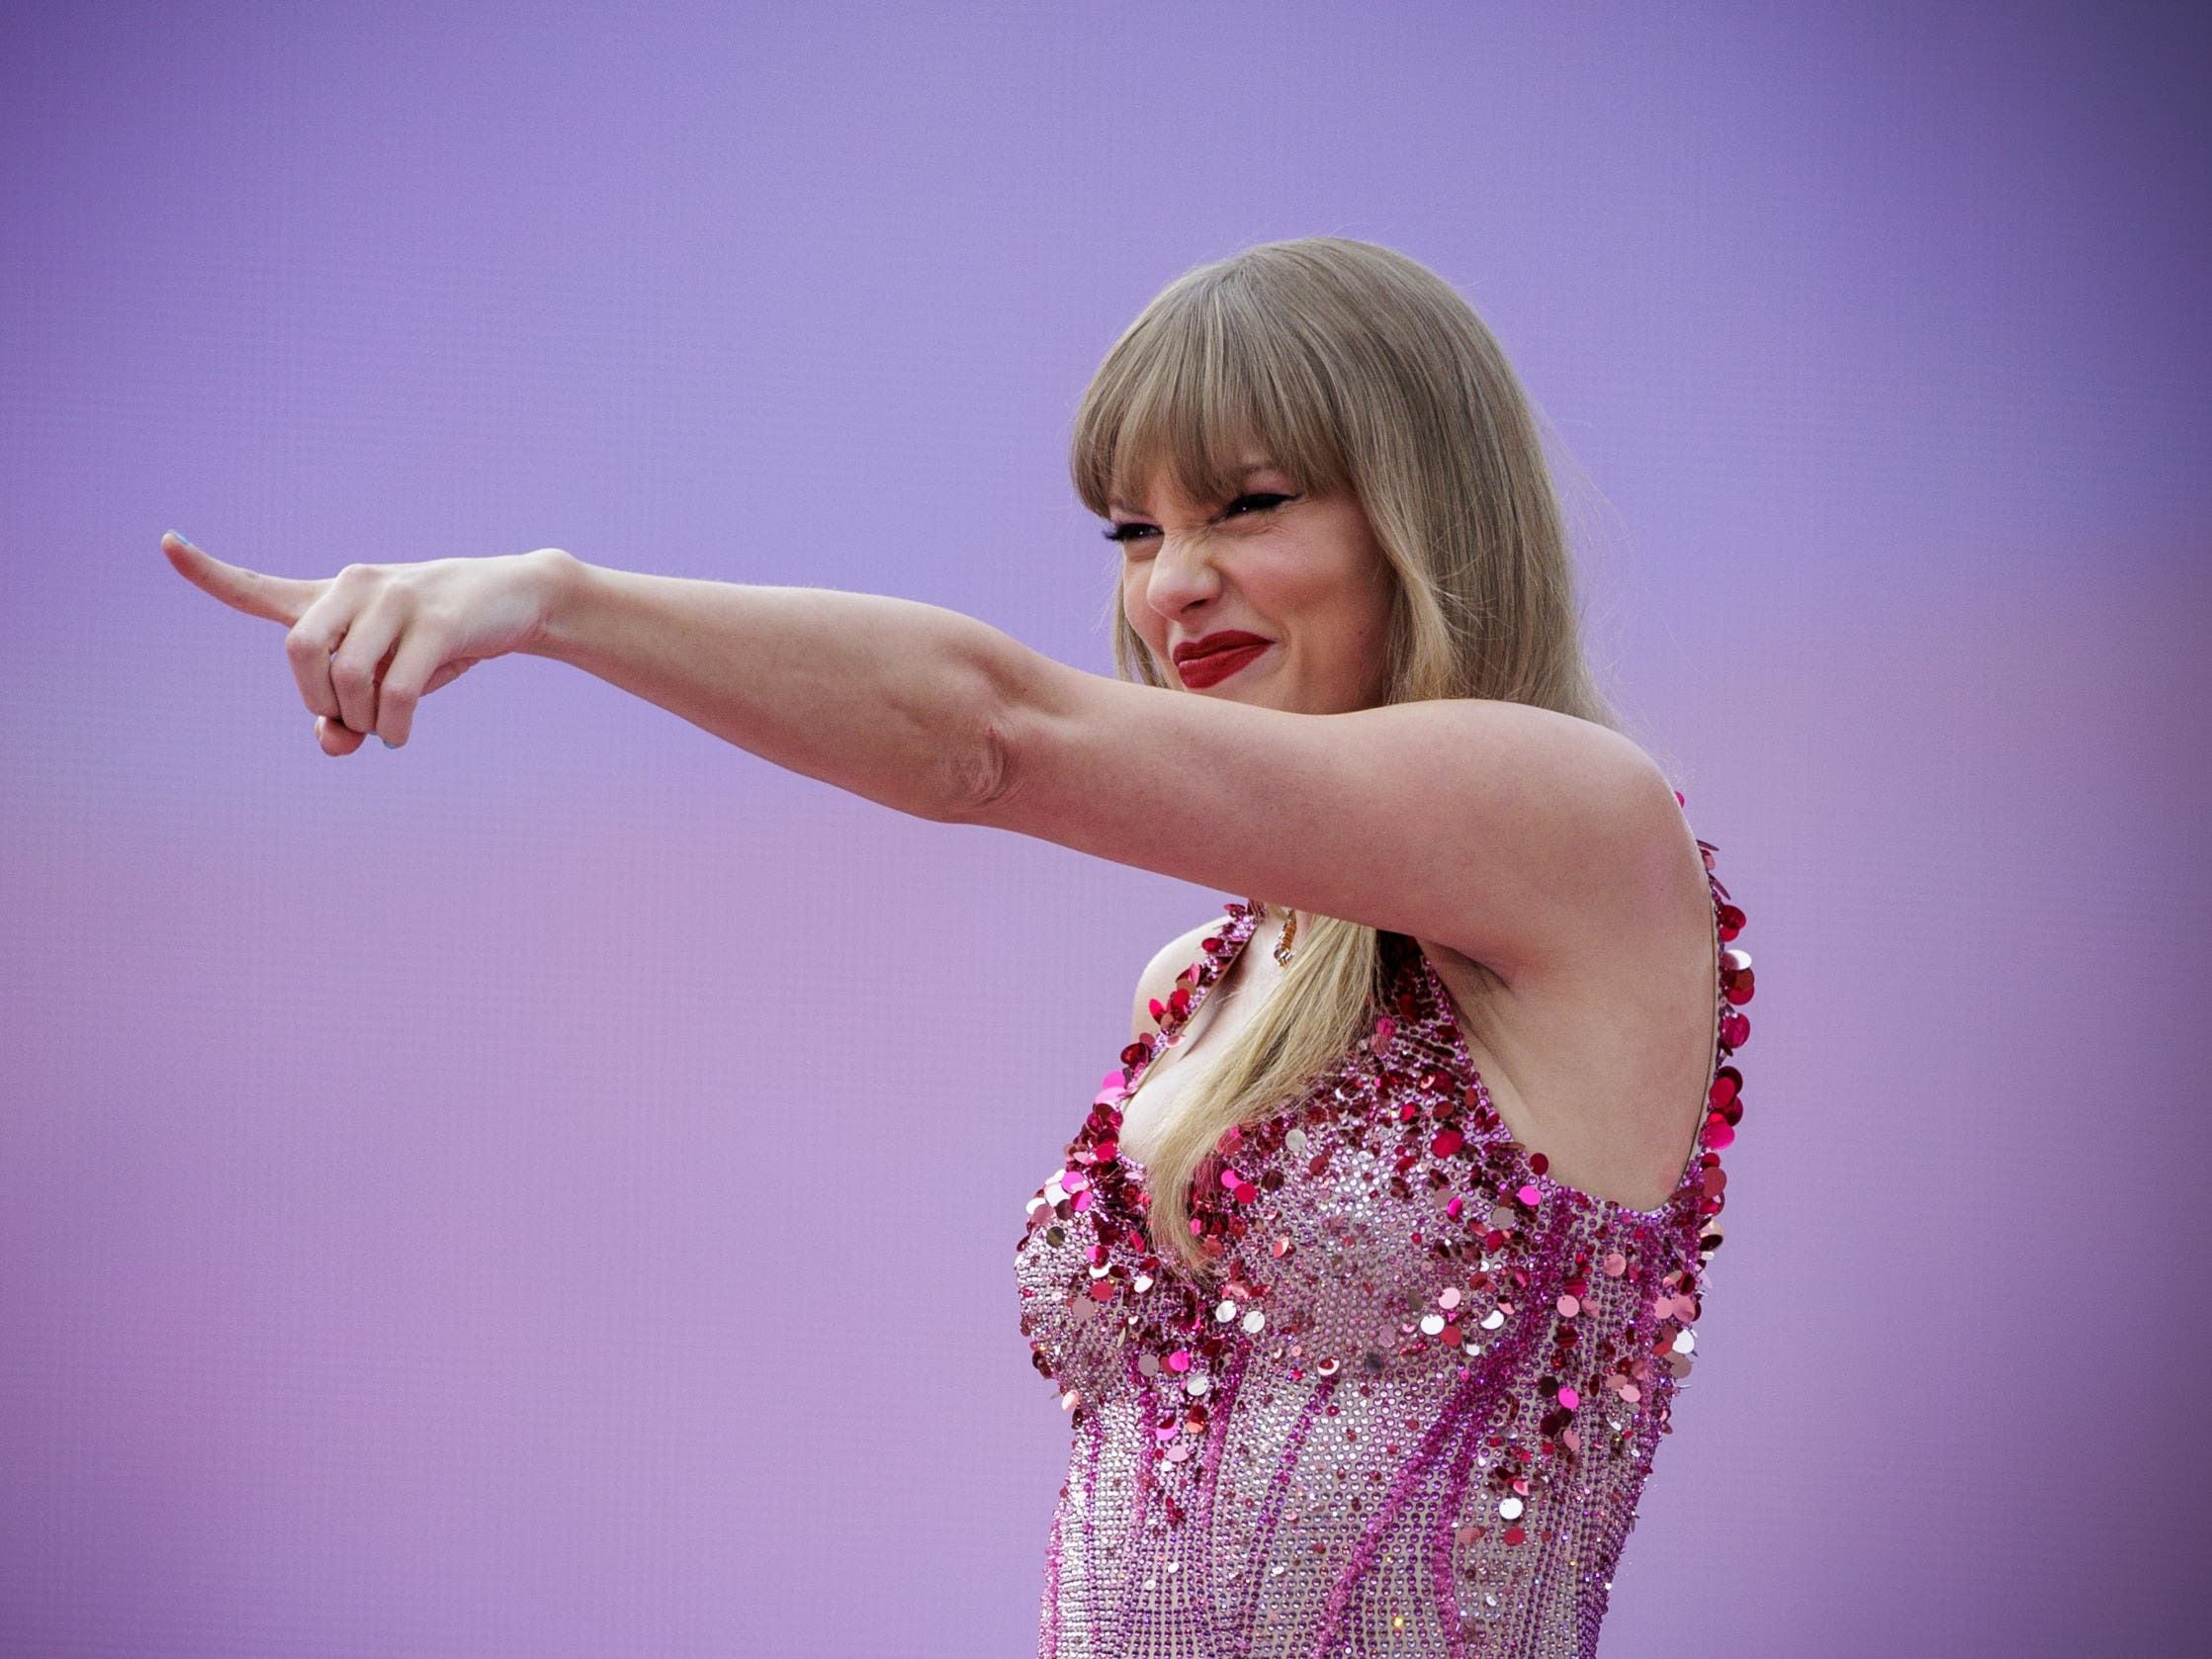 V&A Songbook Trail to show personal archive items from Taylor Swift